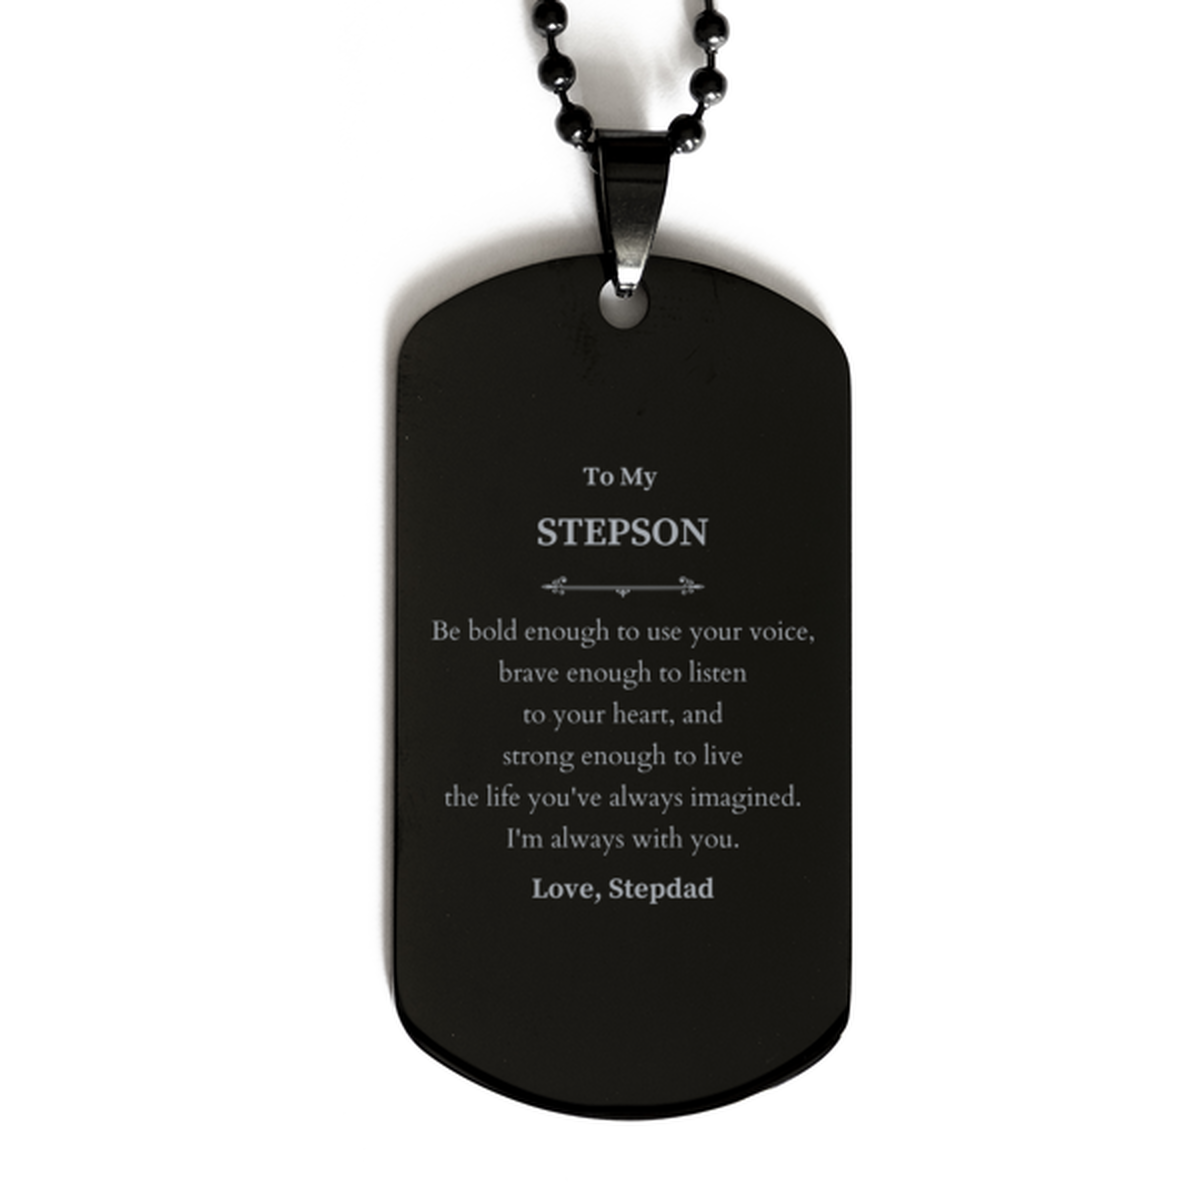 Keepsake Stepson Black Dog Tag Gift Idea Graduation Christmas Birthday Stepson from Stepdad, Stepson Be bold enough to use your voice, brave enough to listen to your heart. Love, Stepdad